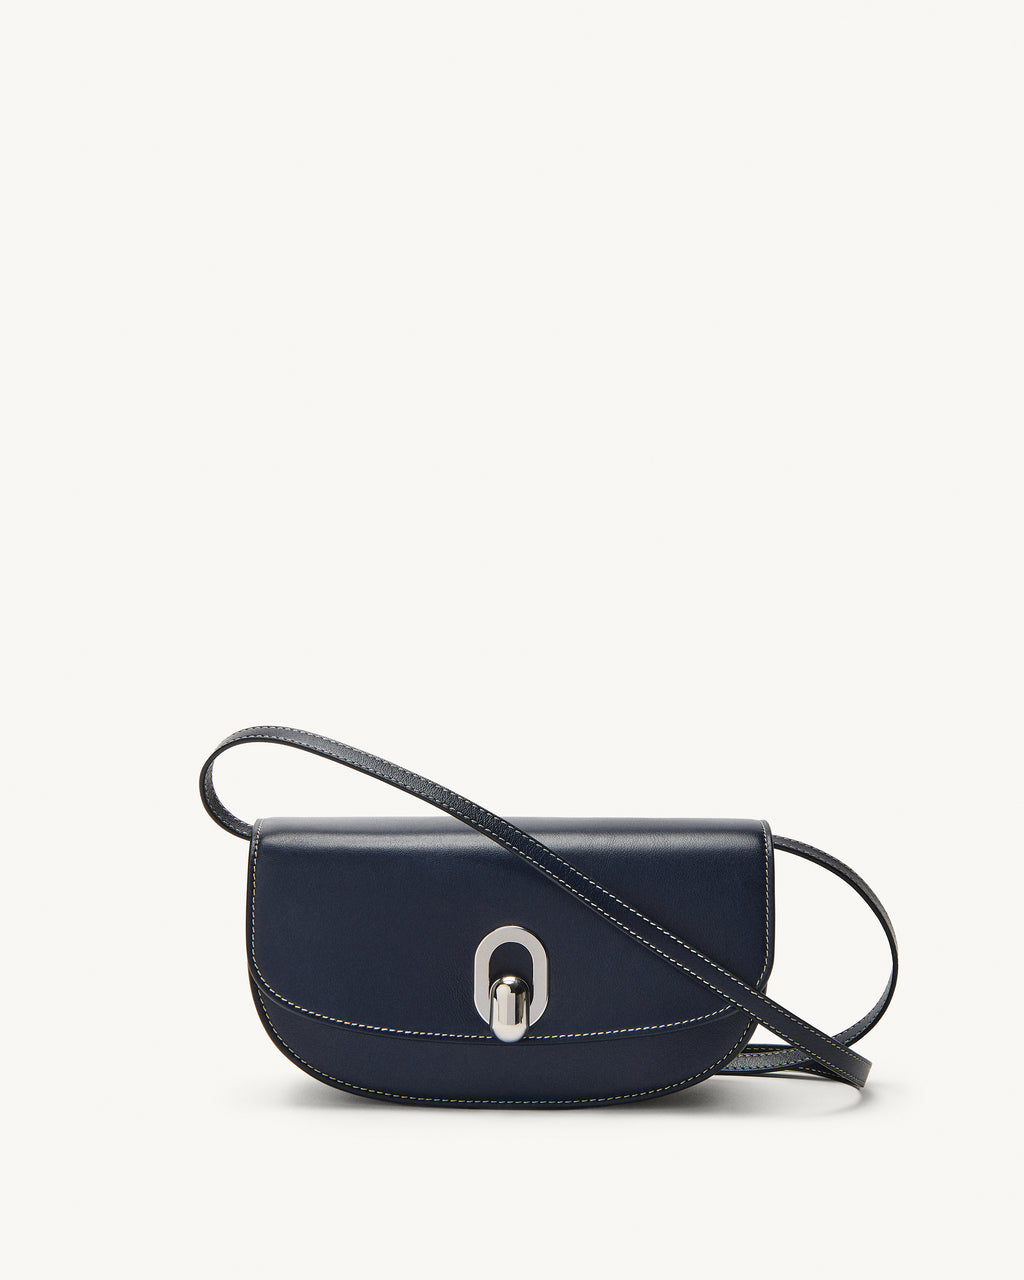 Tondo Crescent in Navy Leather